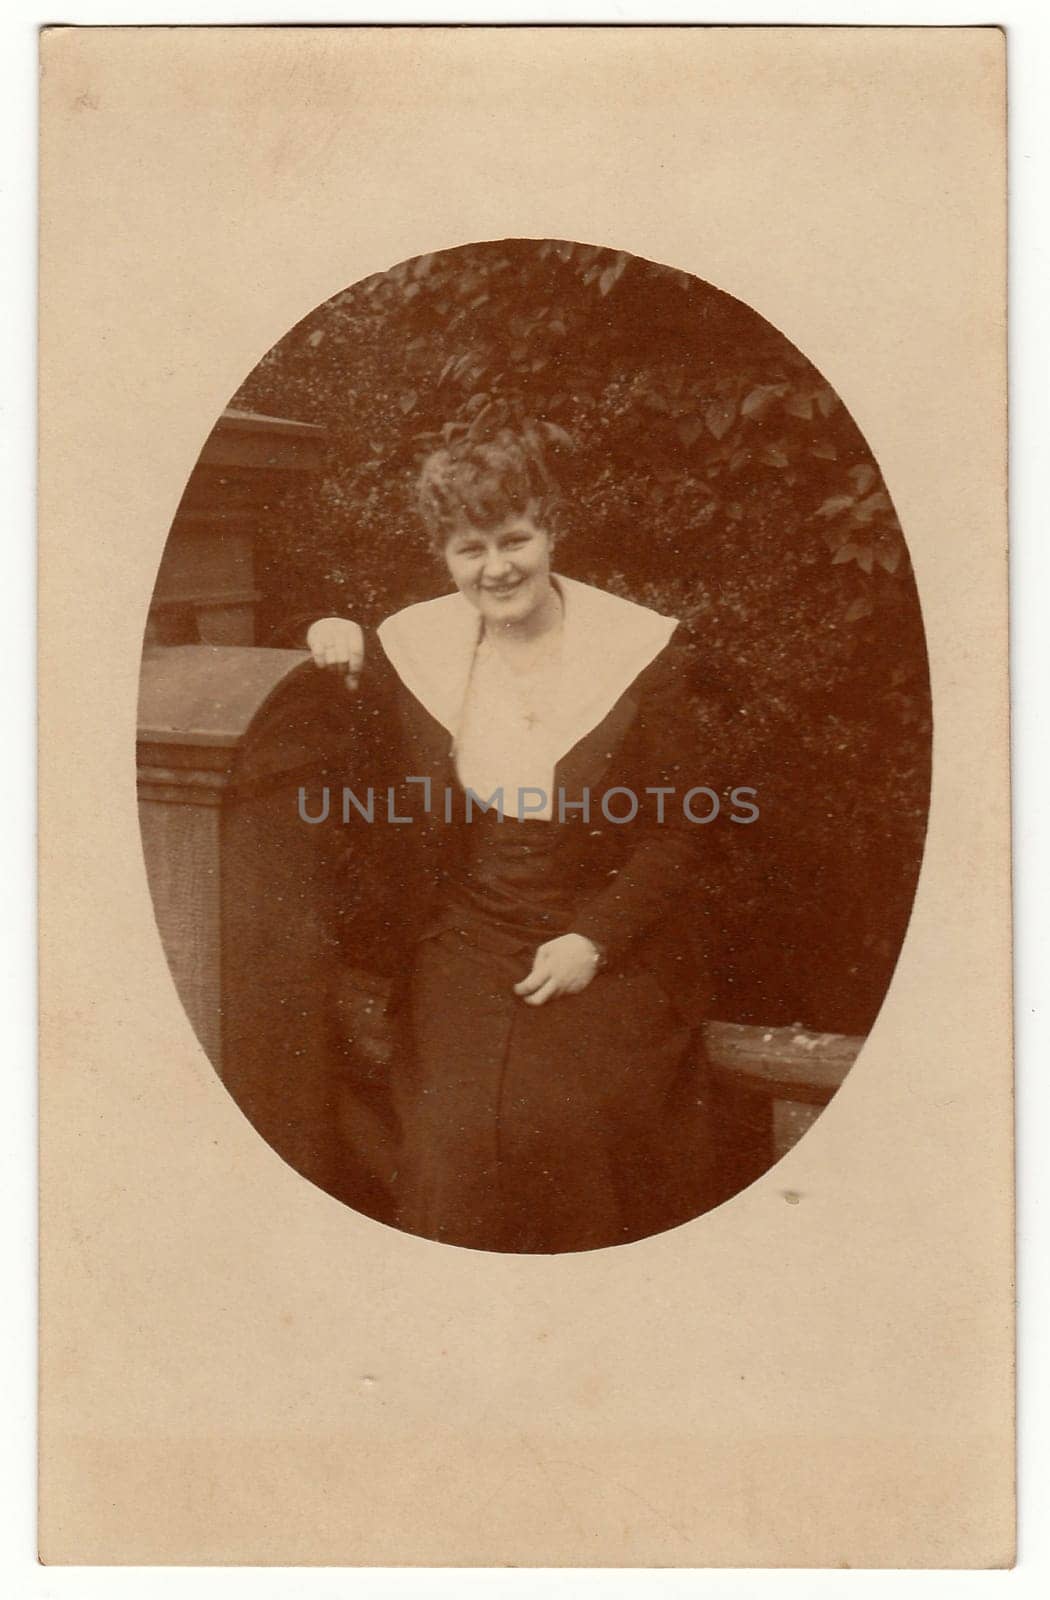 Vintage photo shows a mature woman. Photography is oval shaped. by roman_nerud